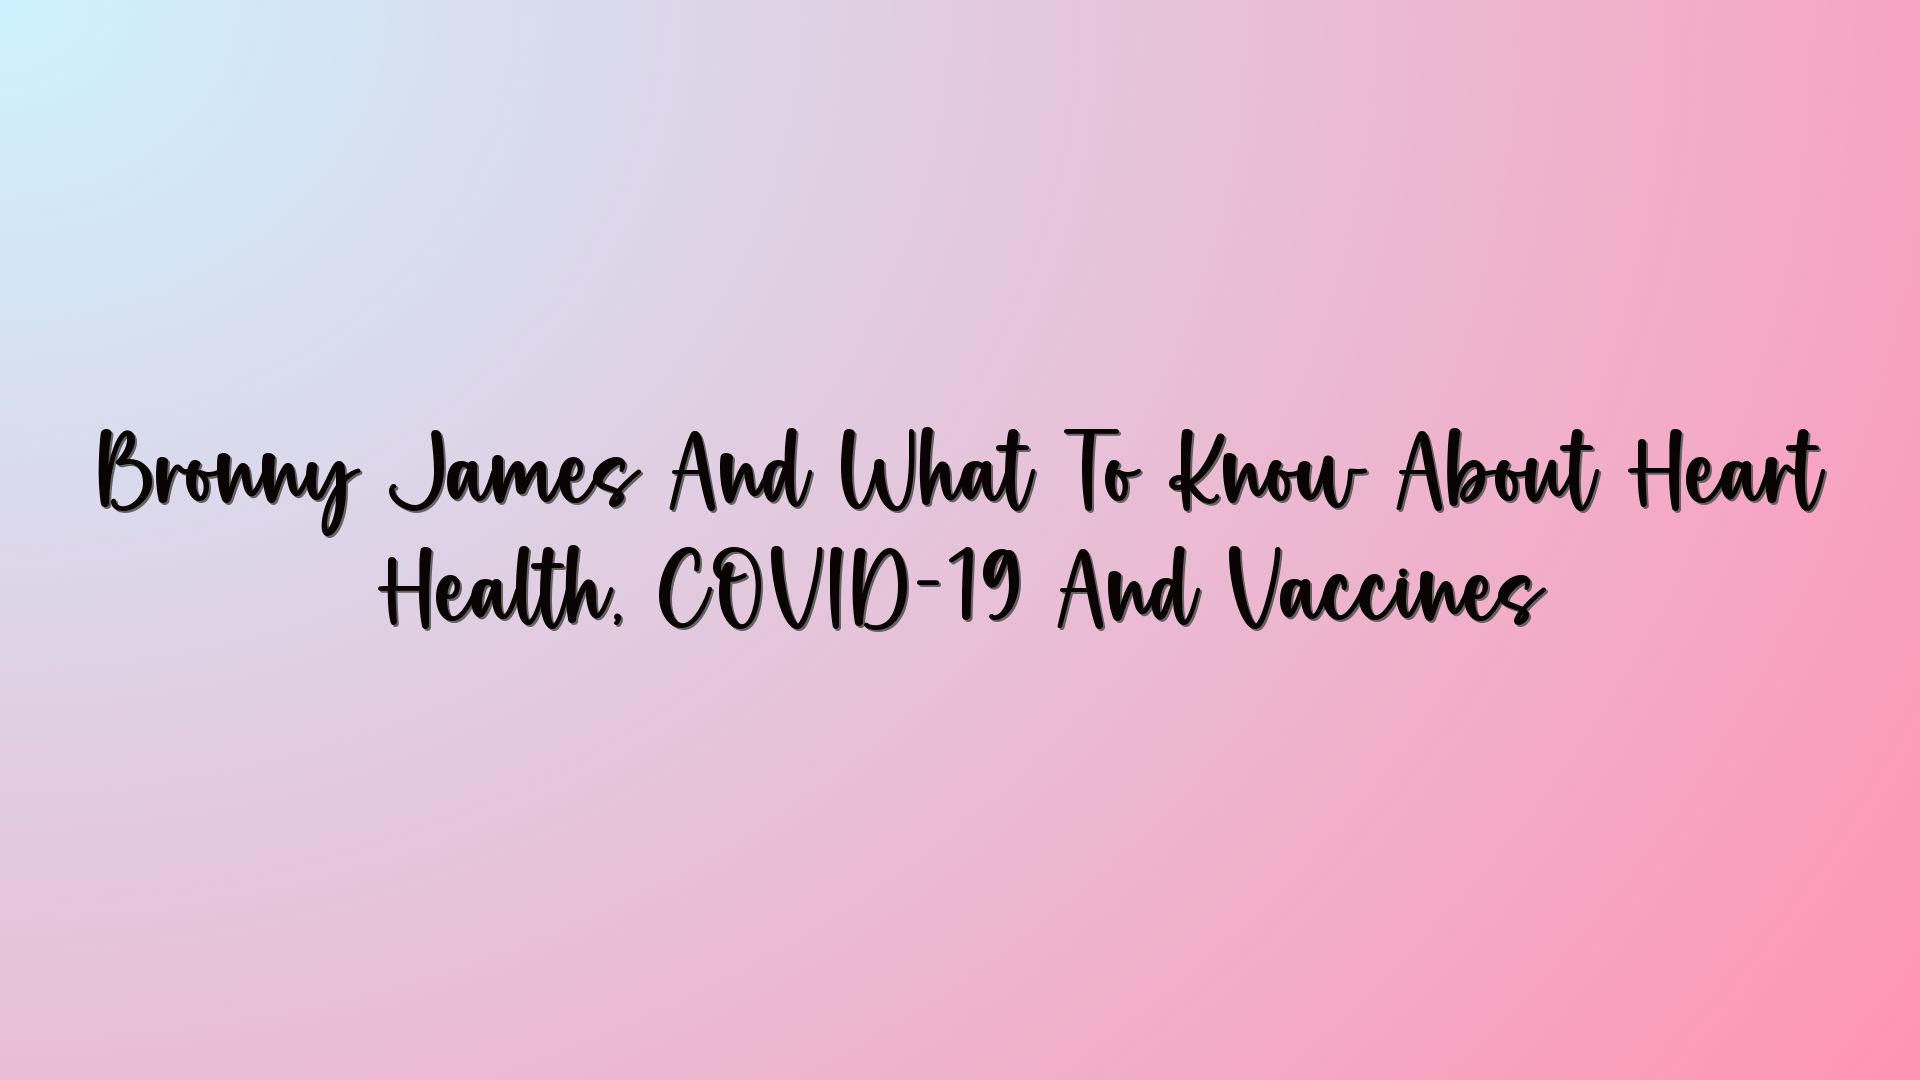 Bronny James And What To Know About Heart Health, COVID-19 And Vaccines